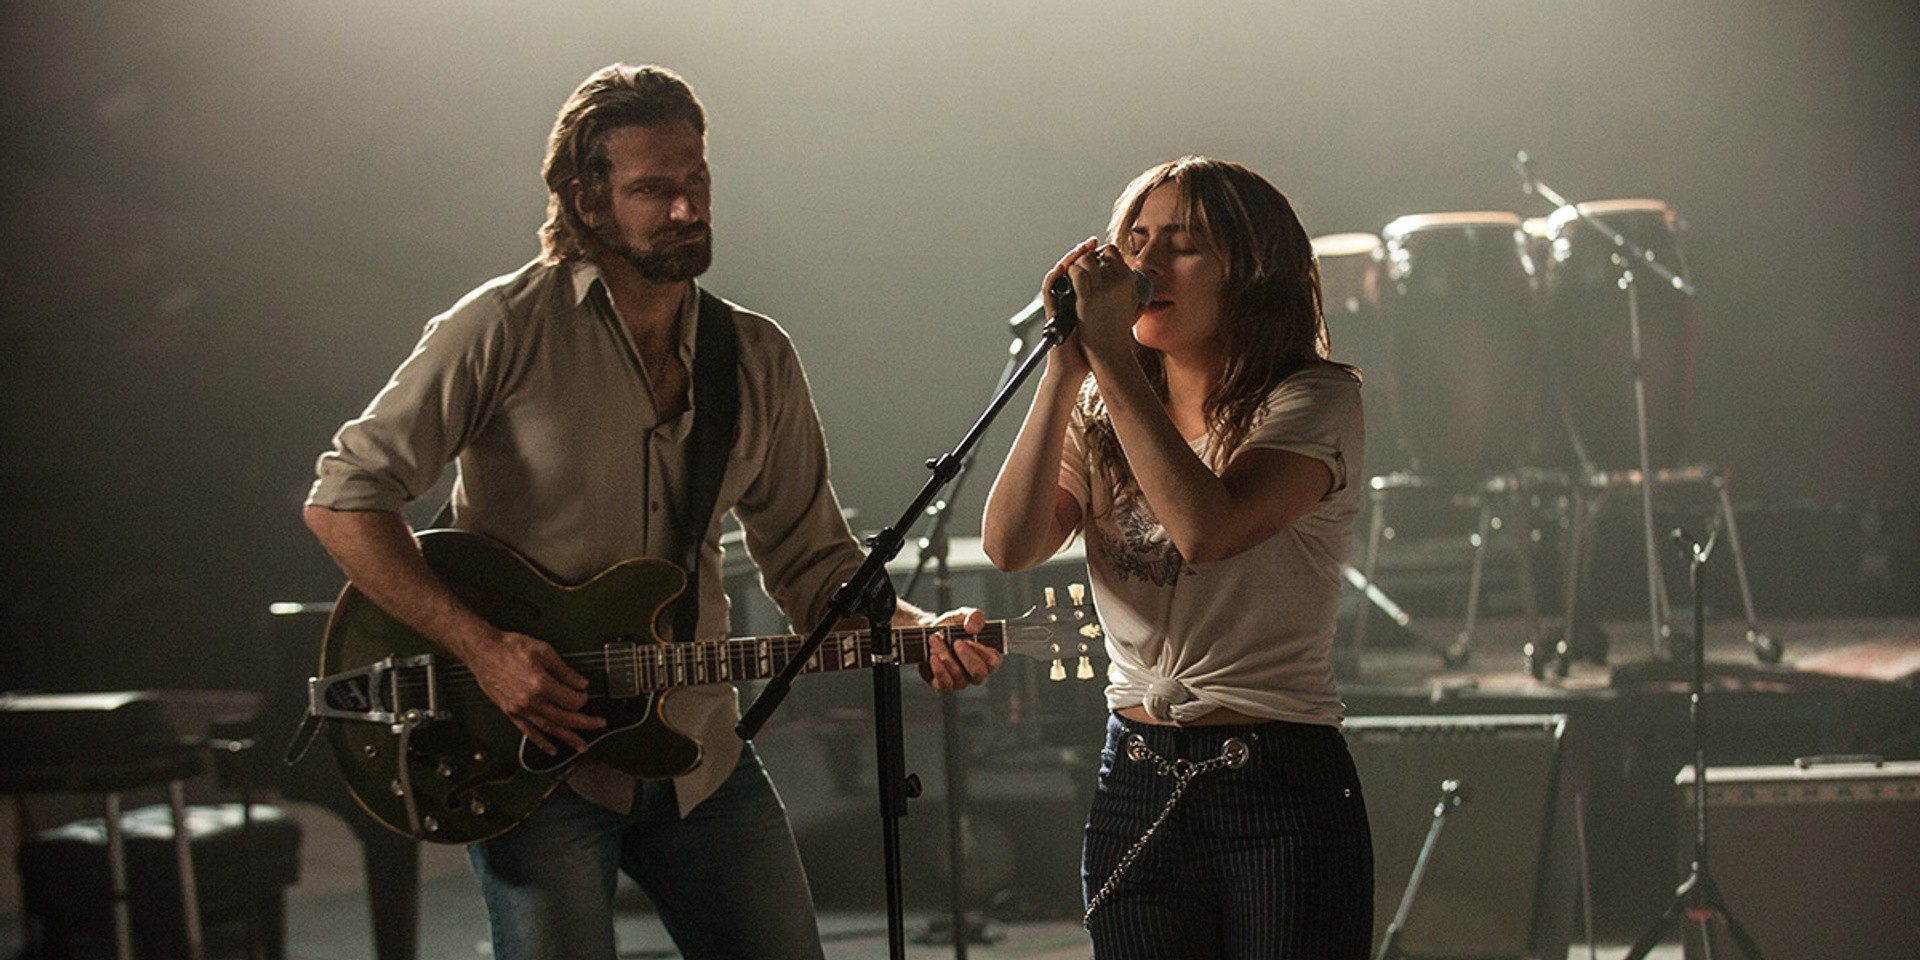 A trailer is out for new movie A Star Is Born, where Lady Gaga and Bradley Cooper play musical soulmates – watch